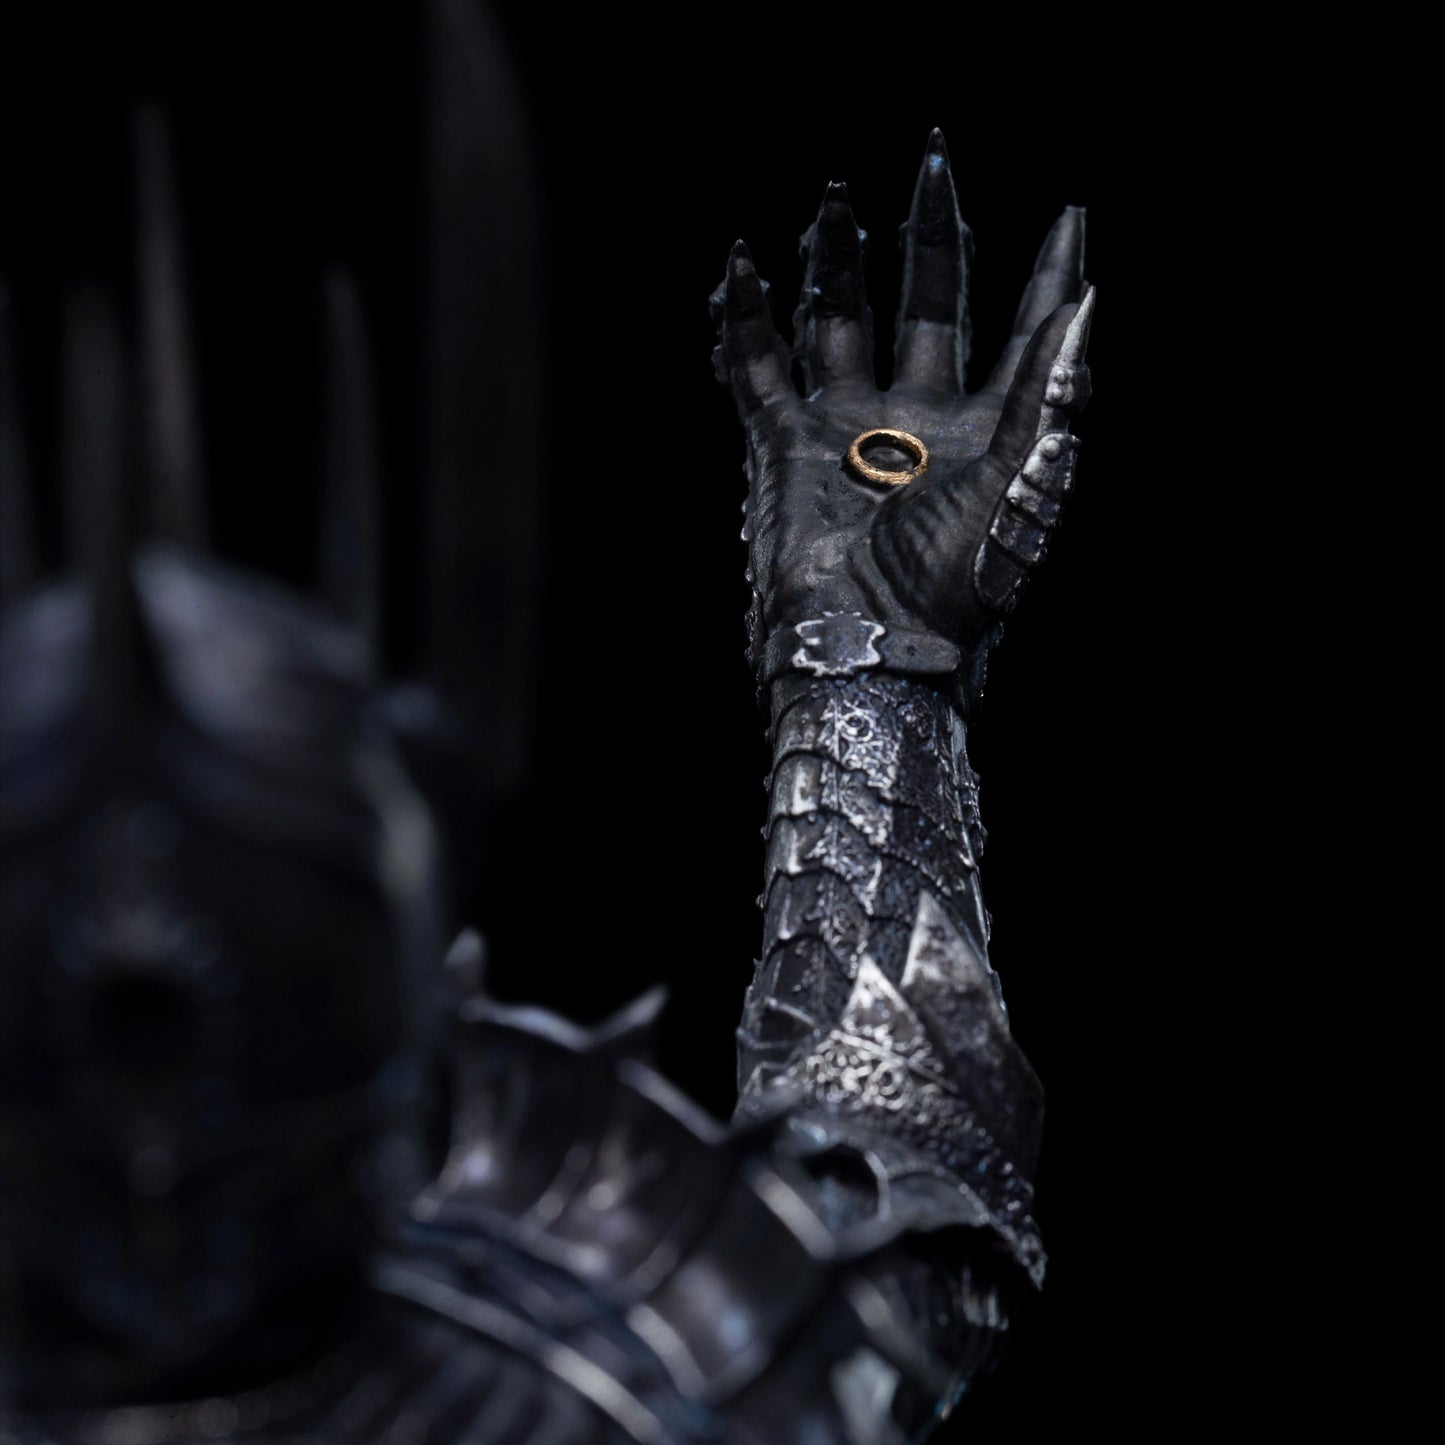 Sauron Lord of the Rings Mini Statue by Weta Workshop